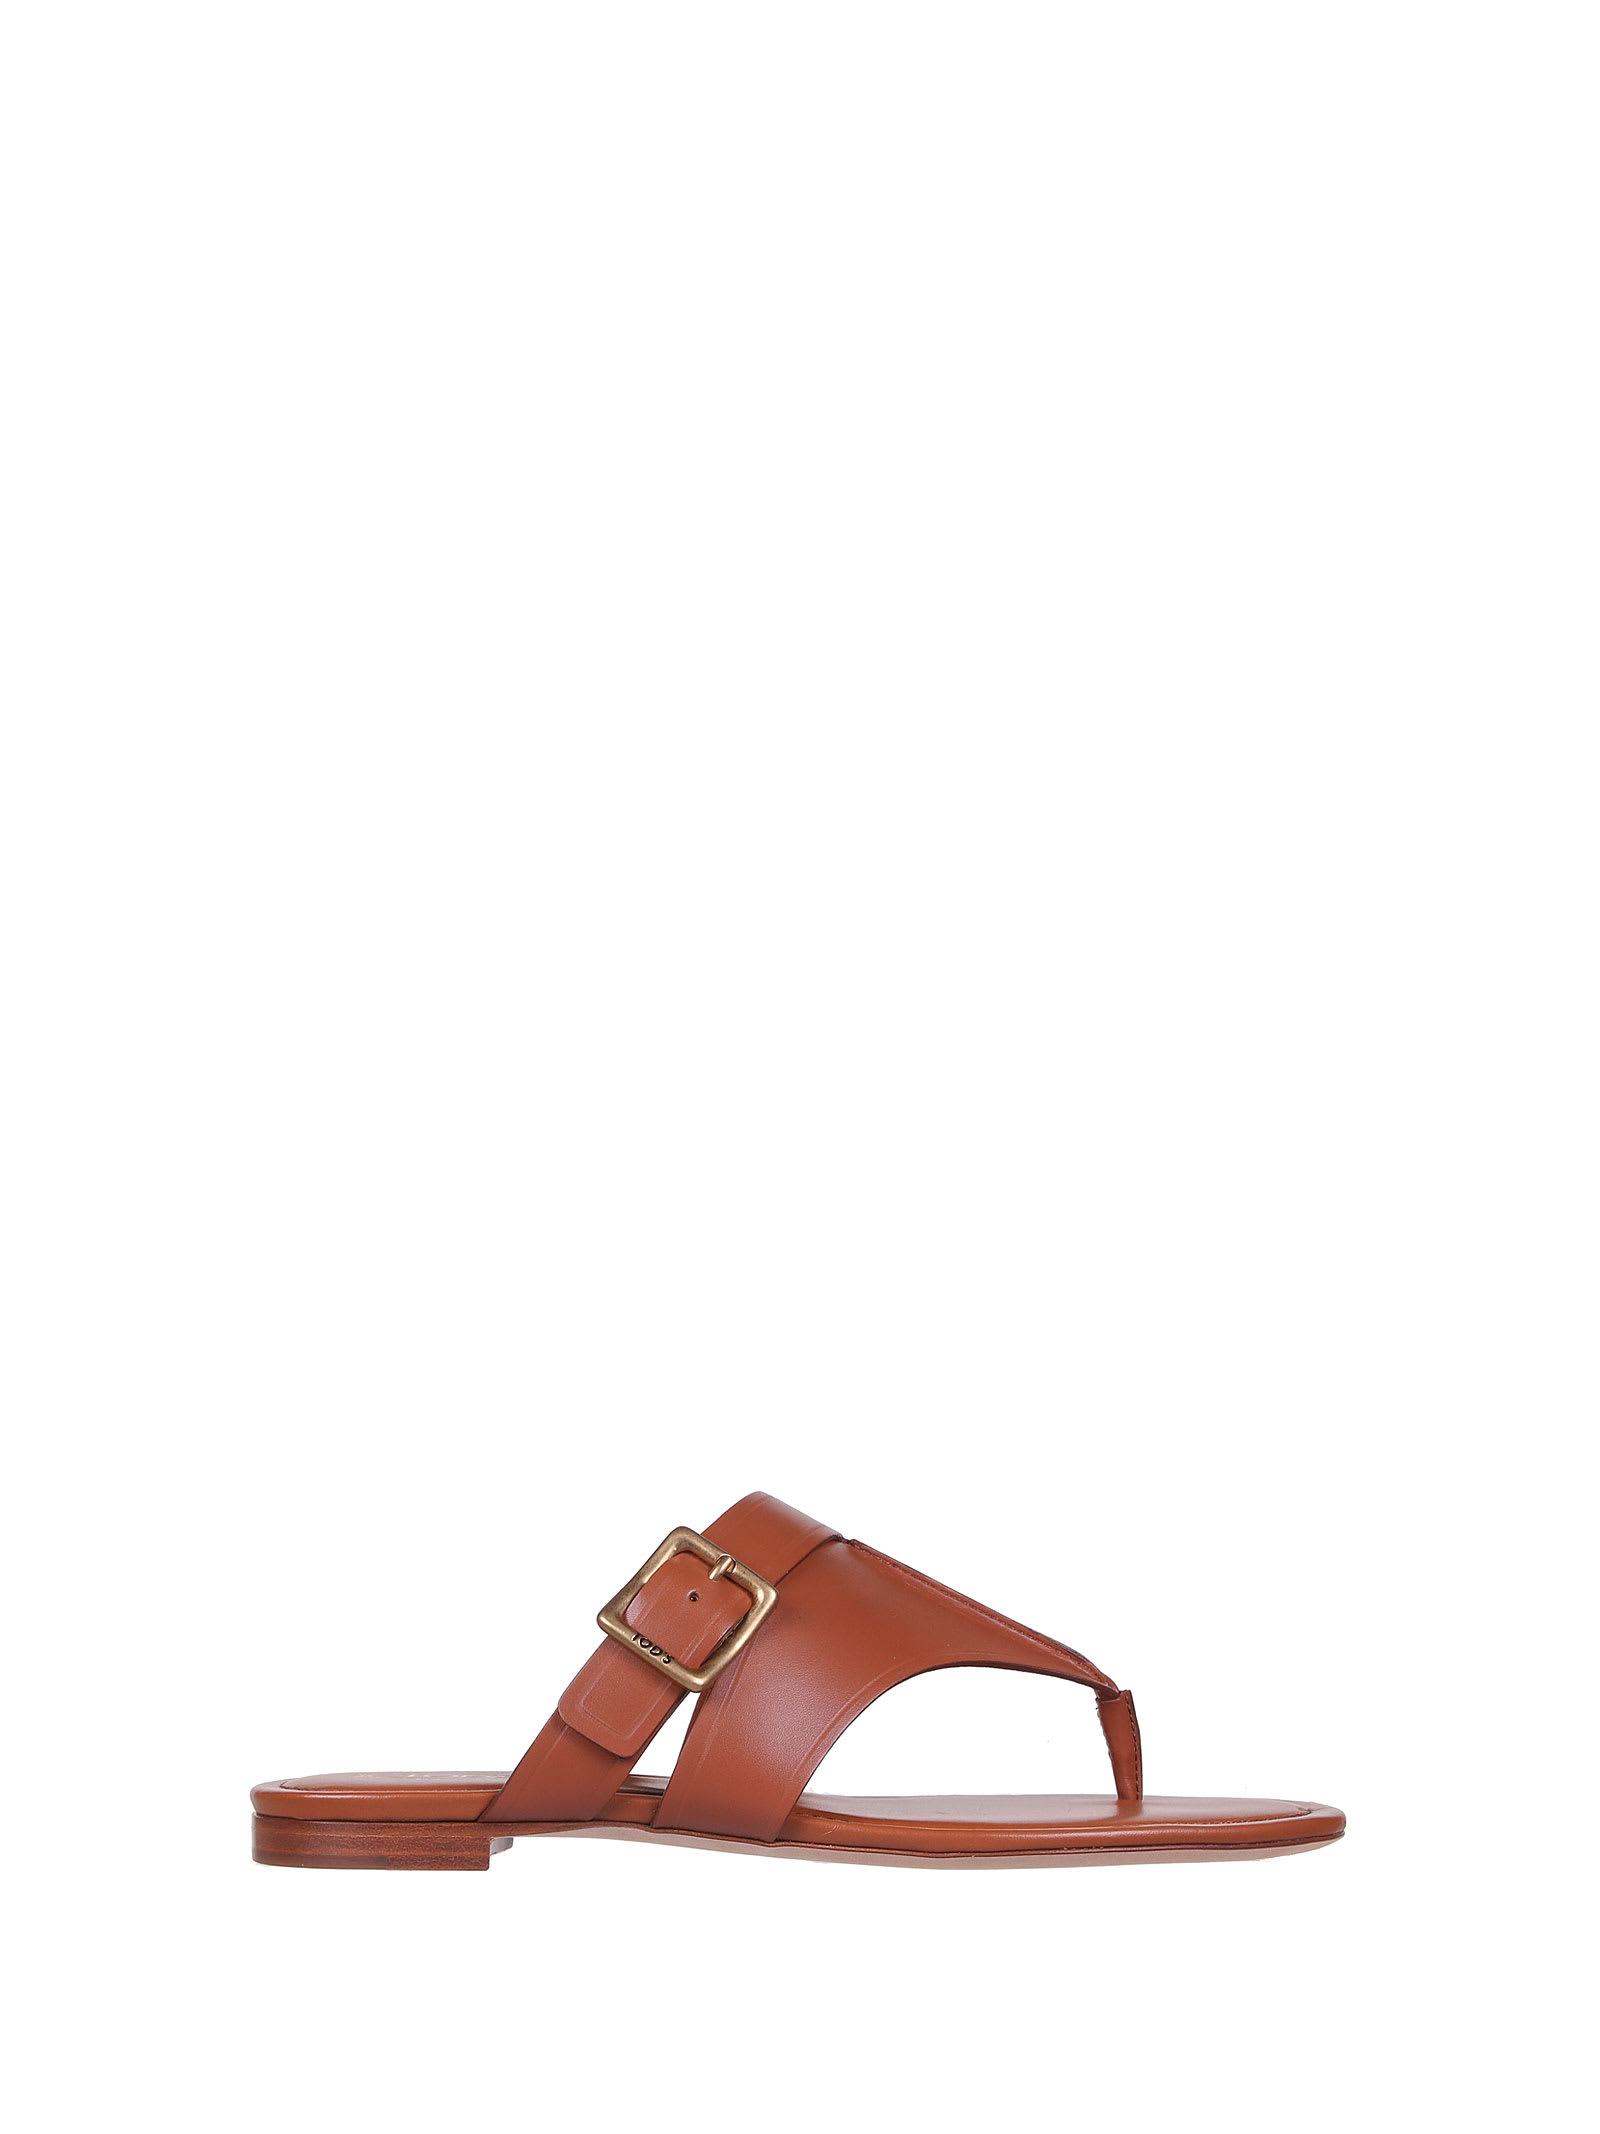 Tods Thong Sandals In Tan Leather